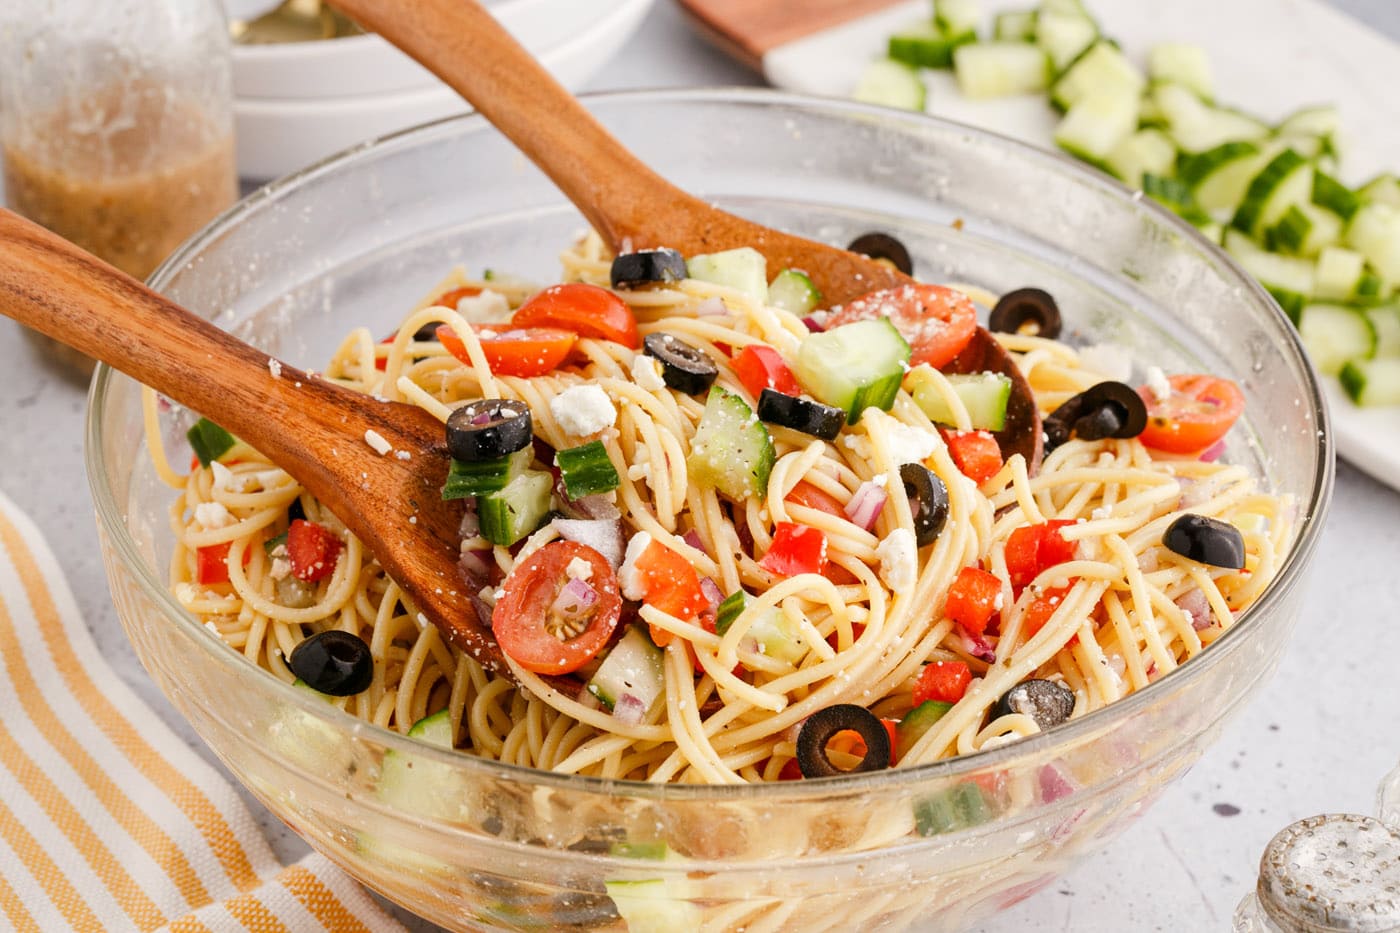 This cold spaghetti salad is floating with different textures and refreshing flavors, perfect for th